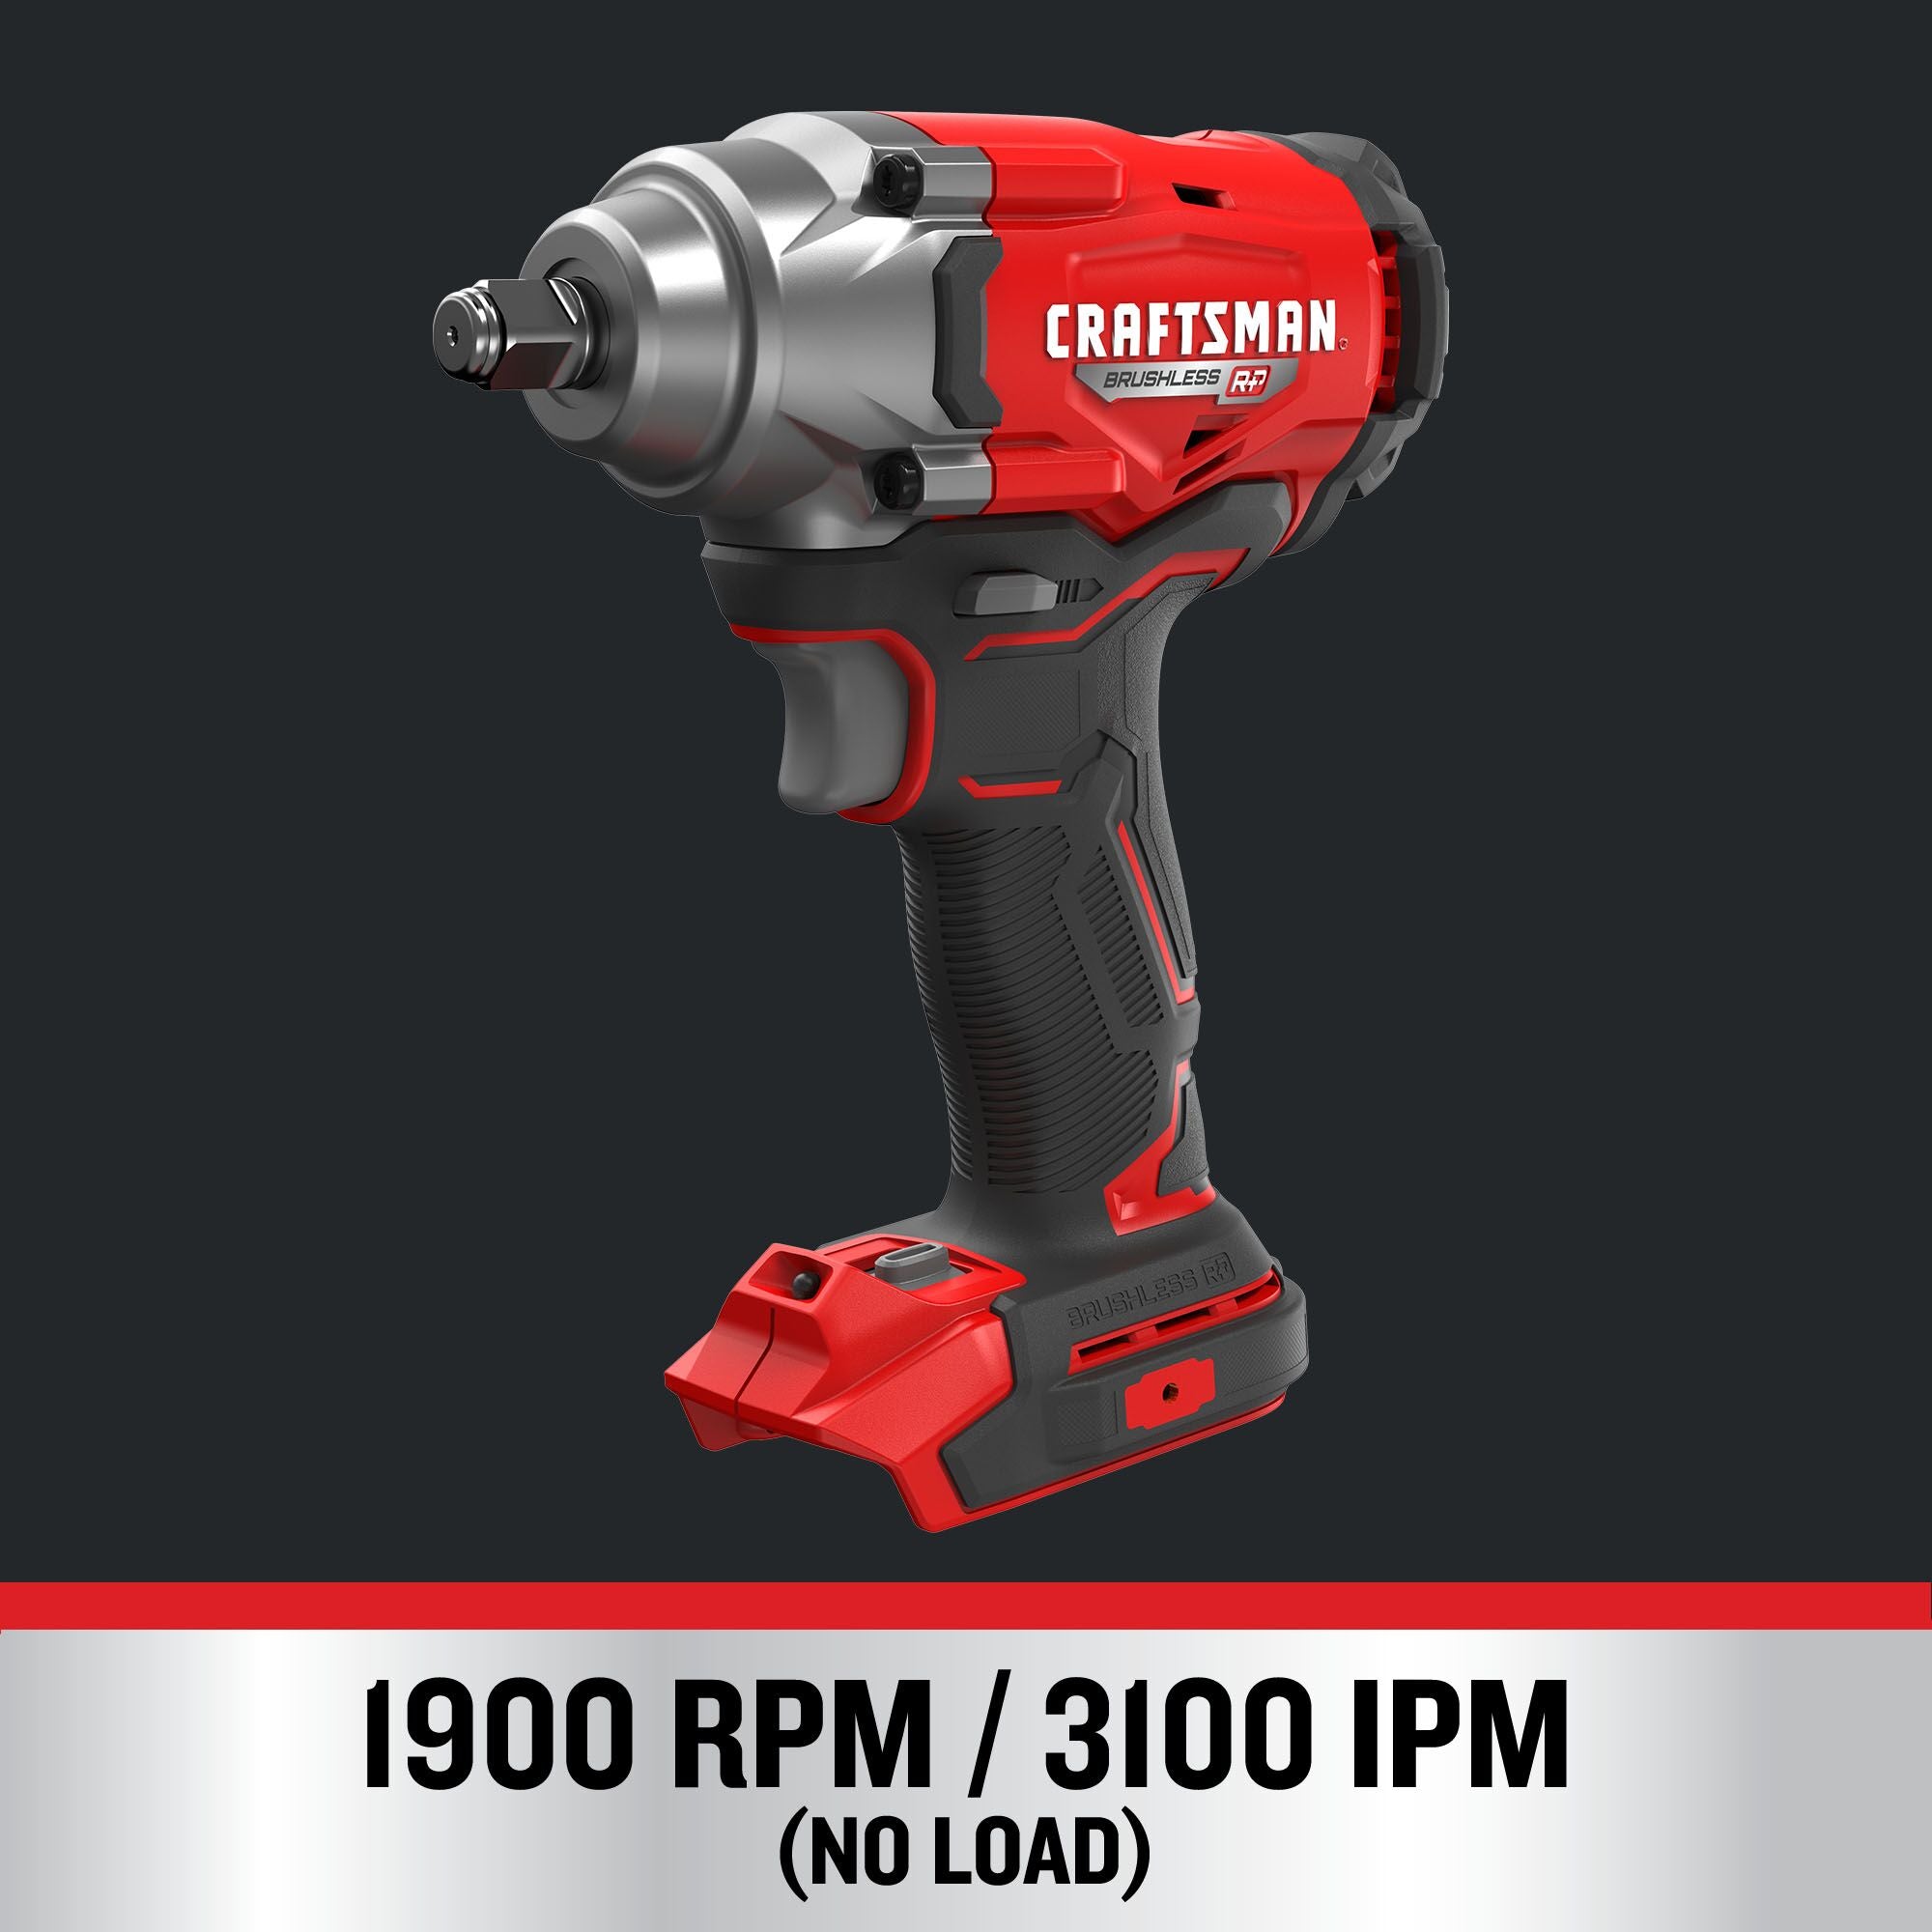 V20 Brushless RP 1/2 inch Impact Wrench (Tool Only) on dark background